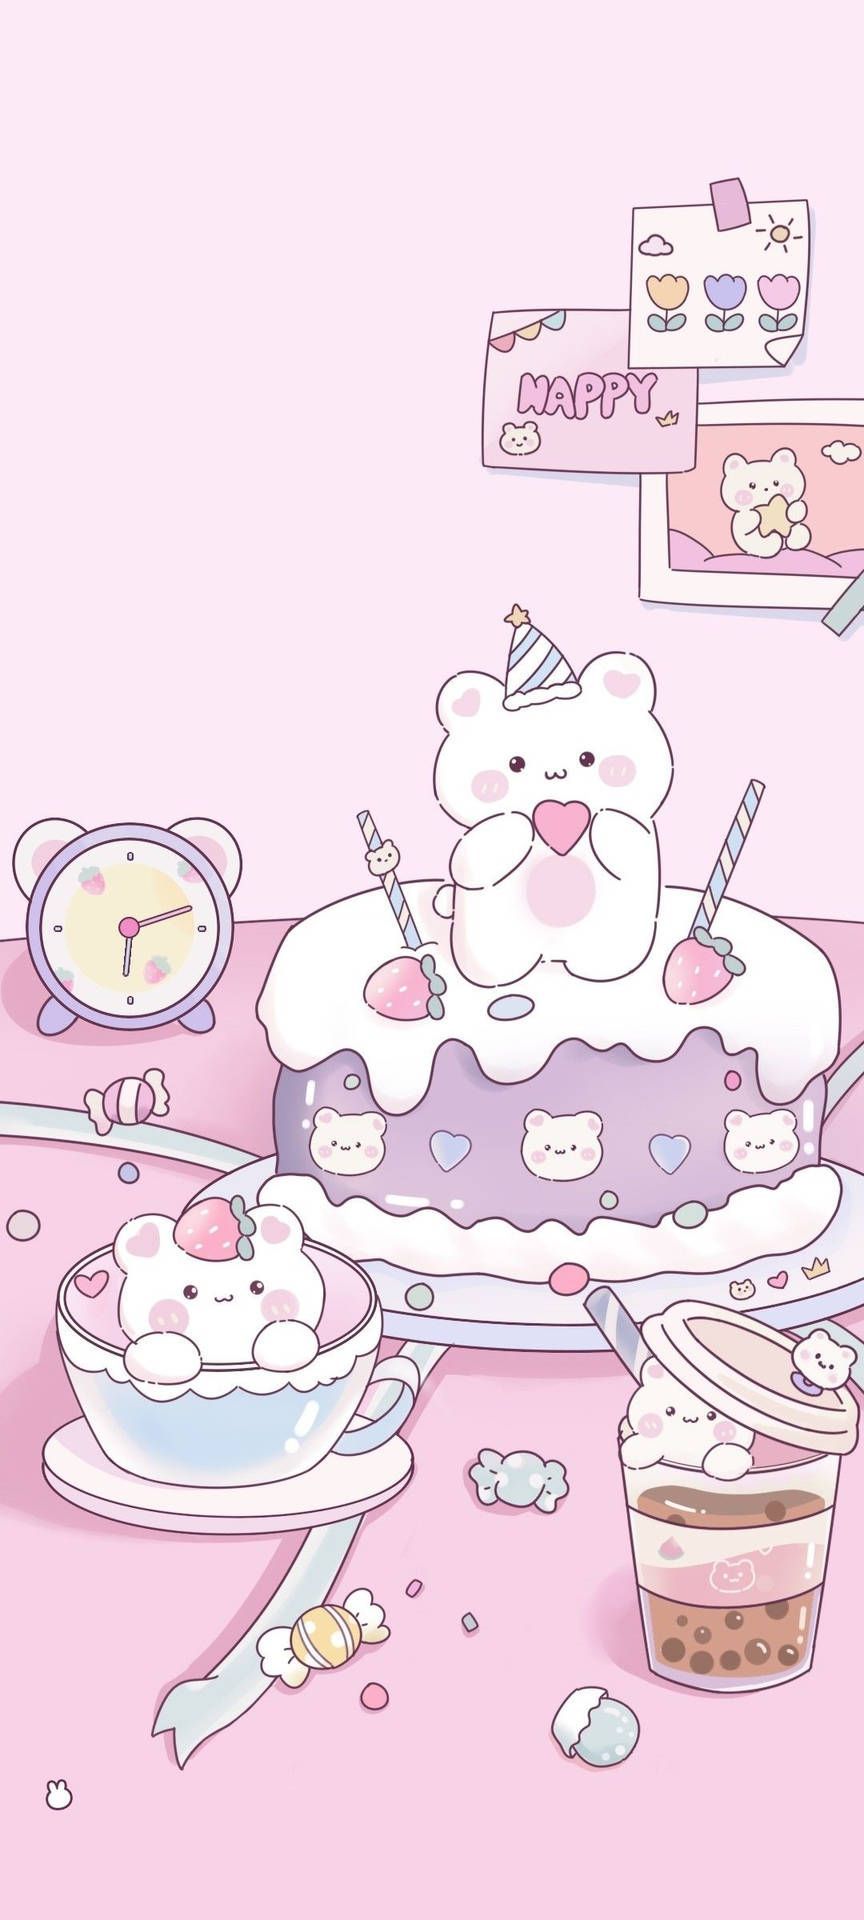 Download Cake And Tea Soft Aesthetic Wallpaper